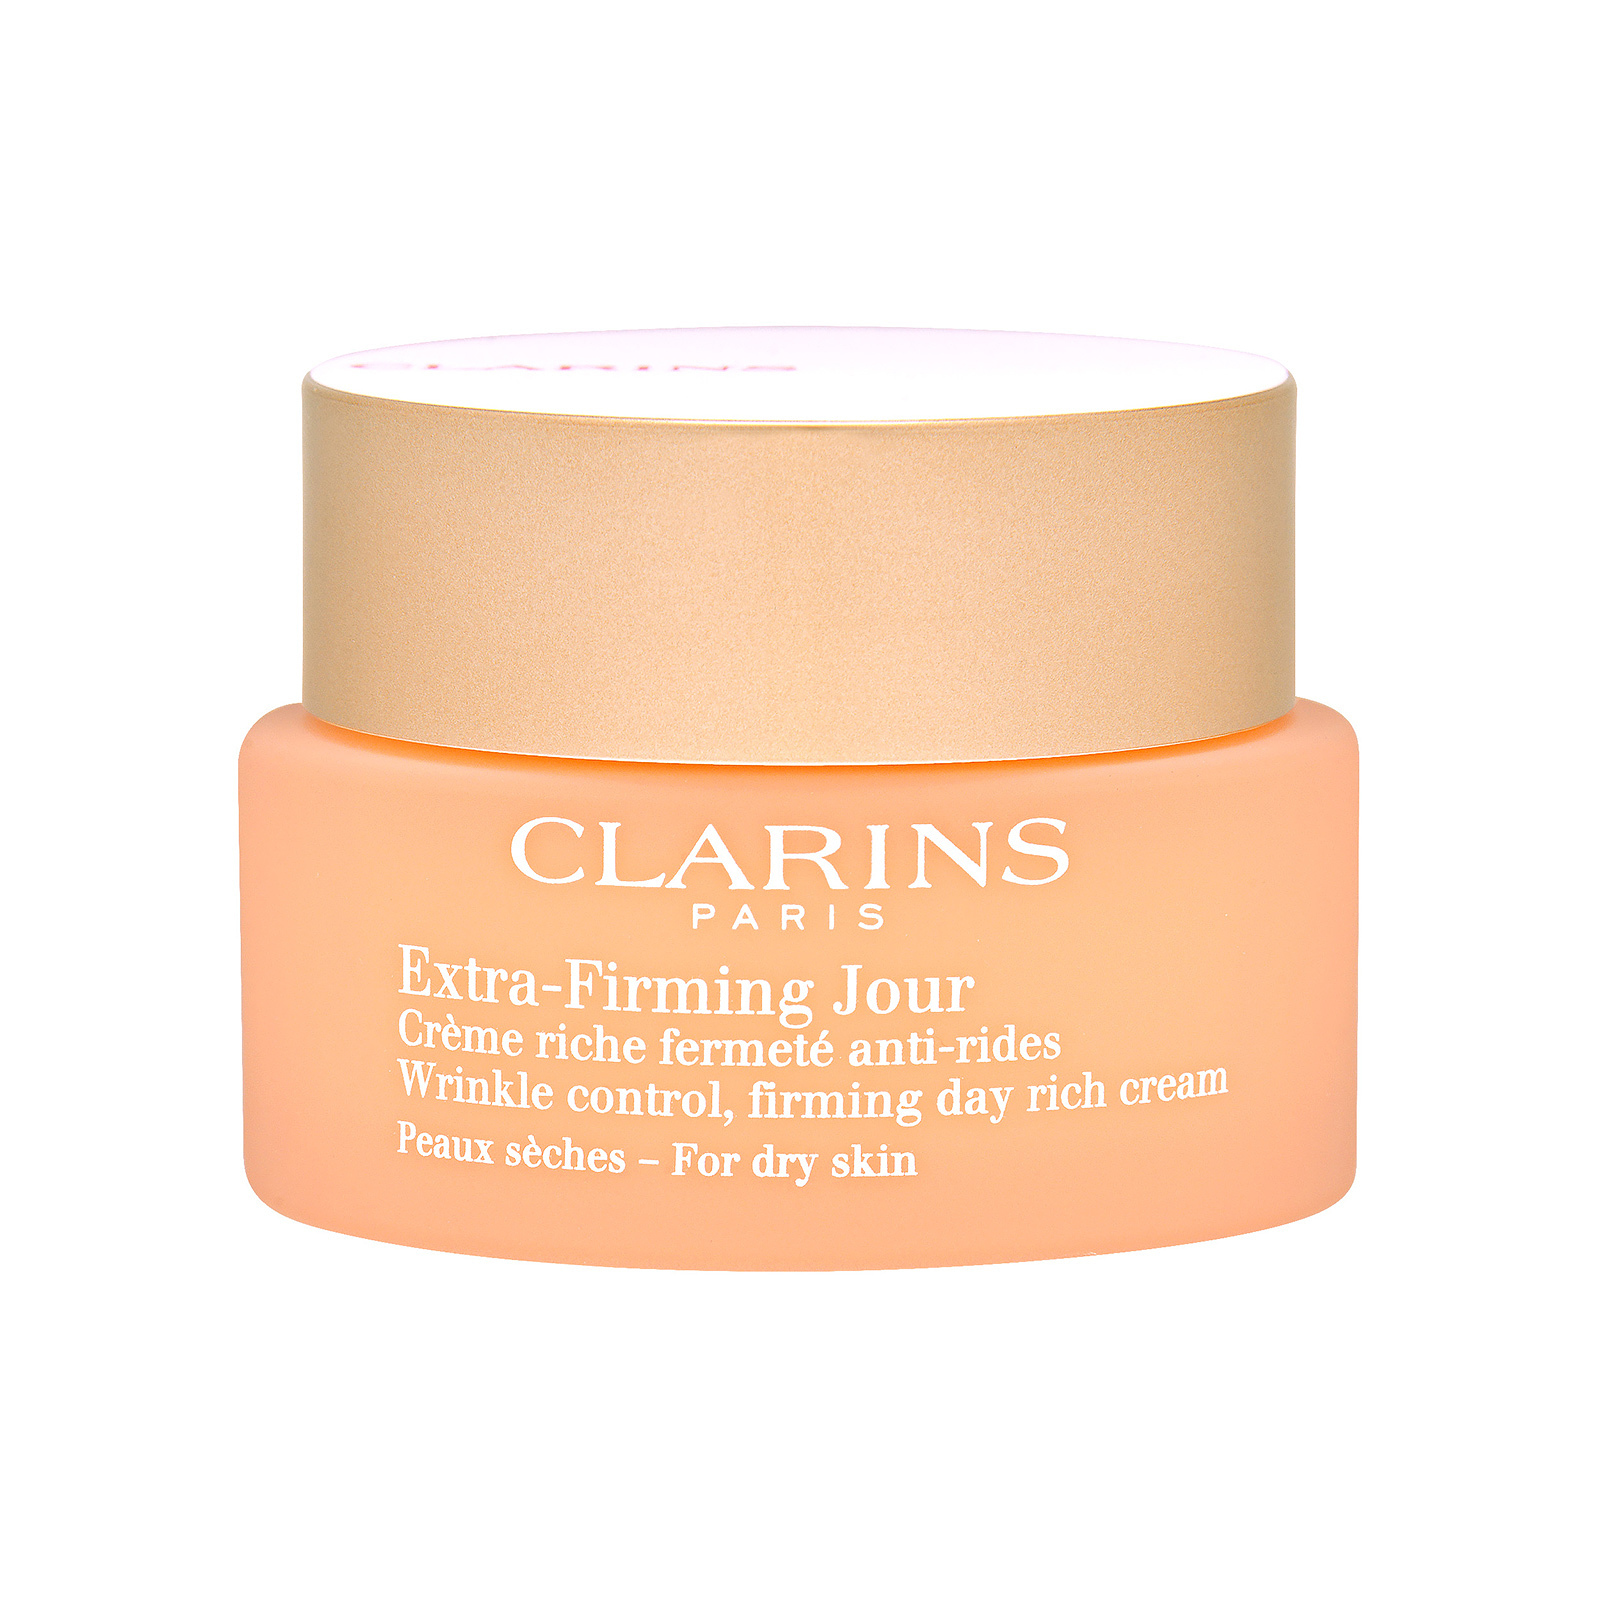 Extra-Firming Wrinkle Control, Firming Day Rich Cream